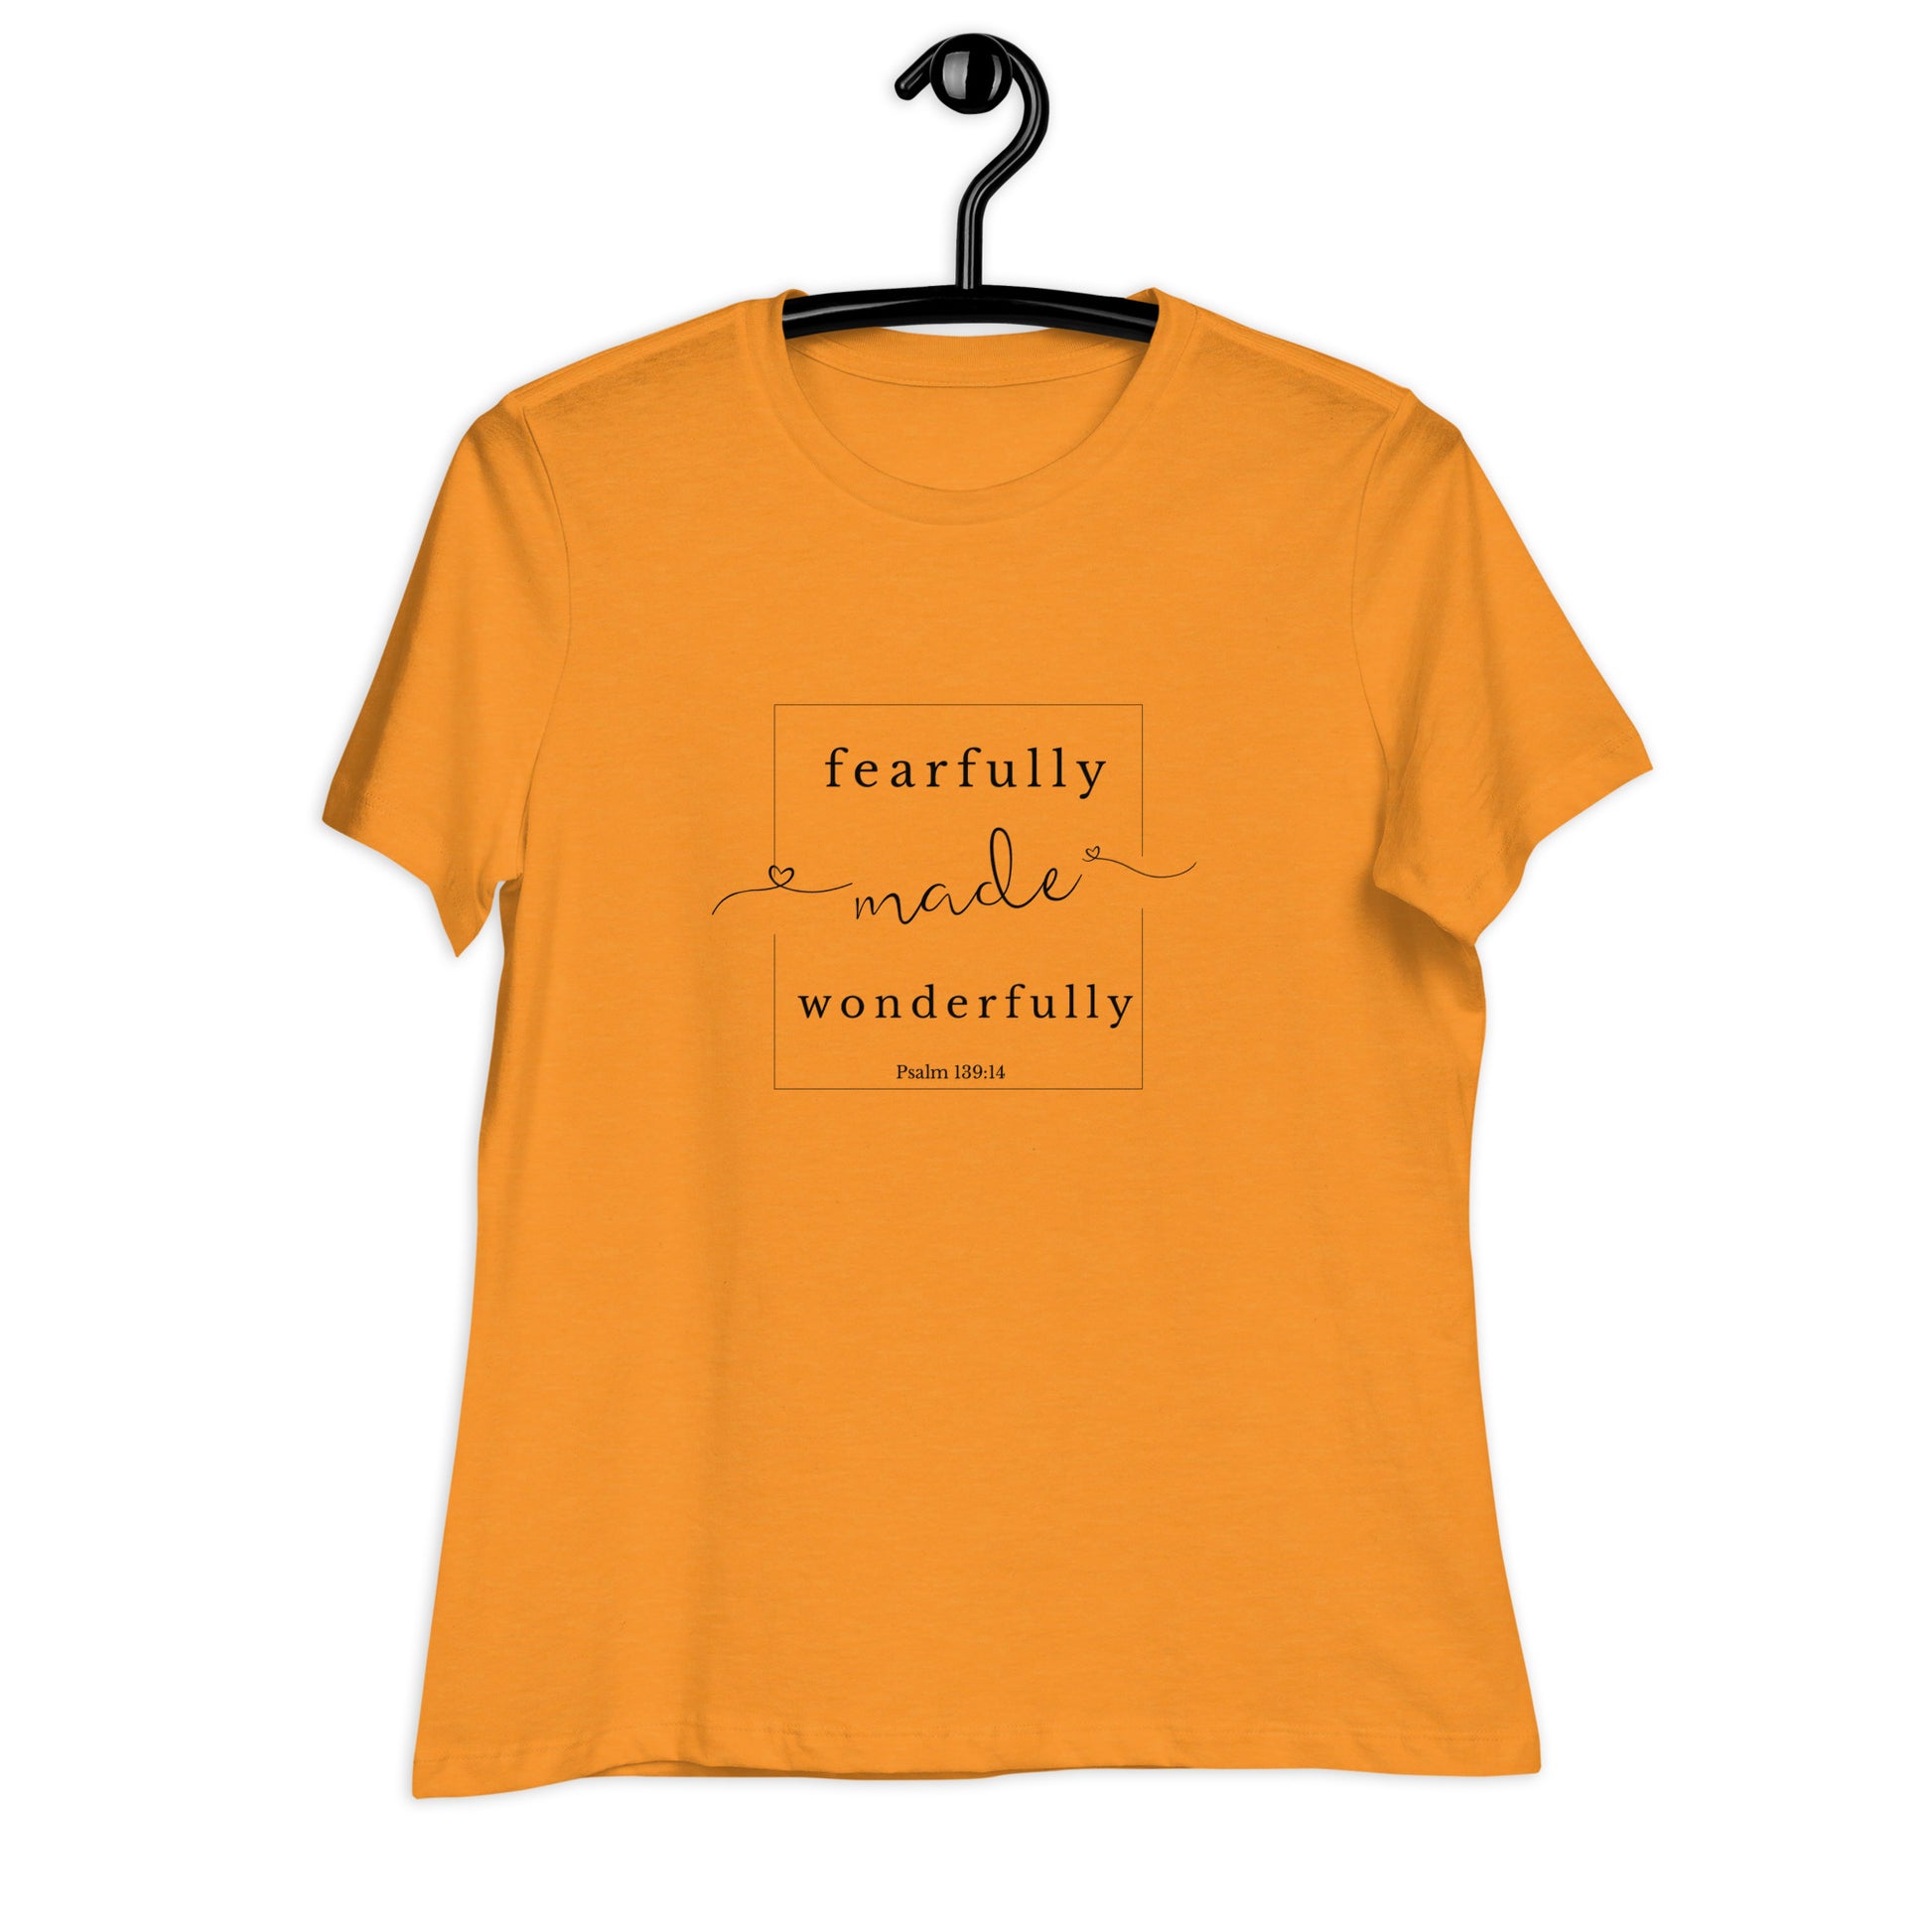 Psalm 139:14 T-Shirt - heather marmalade front on hanger